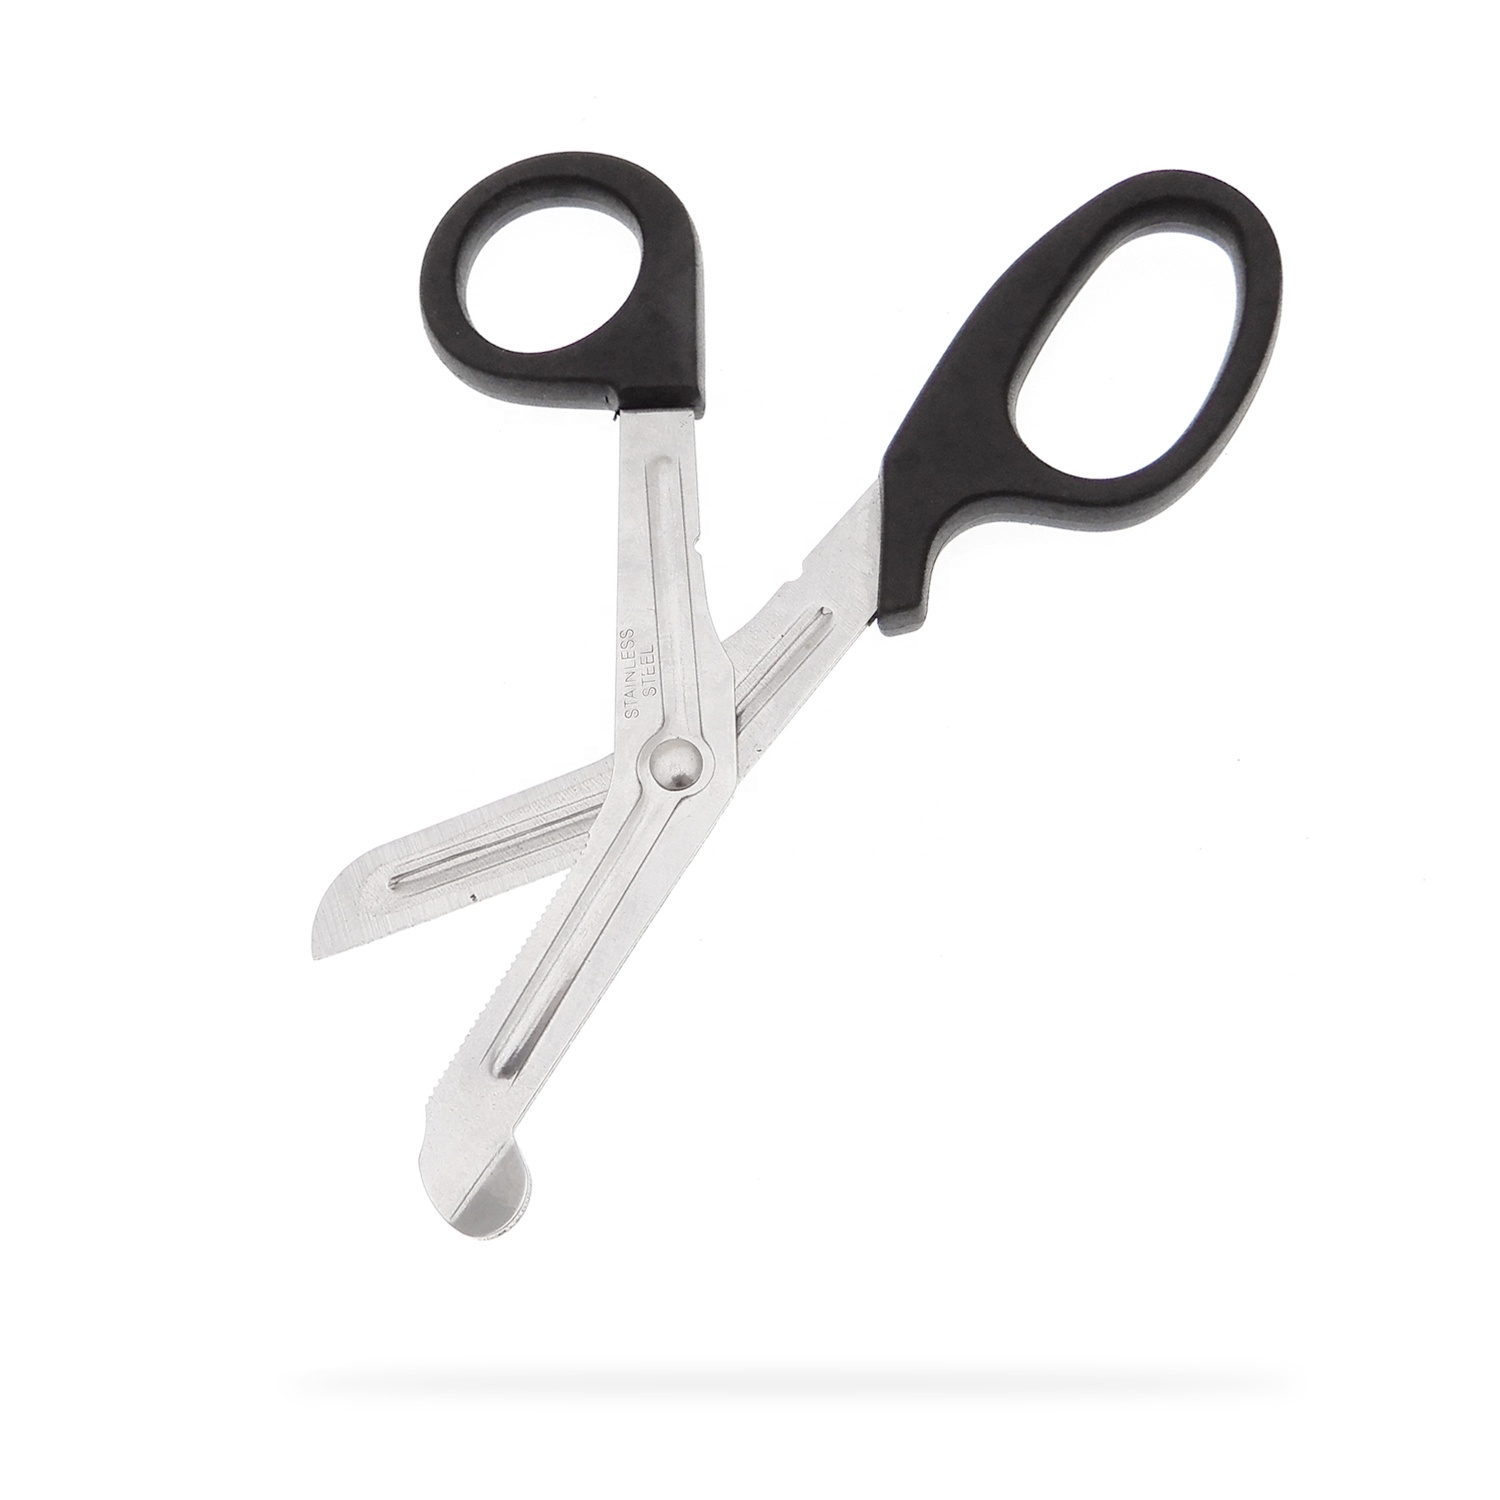 SA-002 Bandage Scissors, Small Bend Plastic Household Gauze Clipper Shears Stainless Steel Safety Metal Emergency Kits
